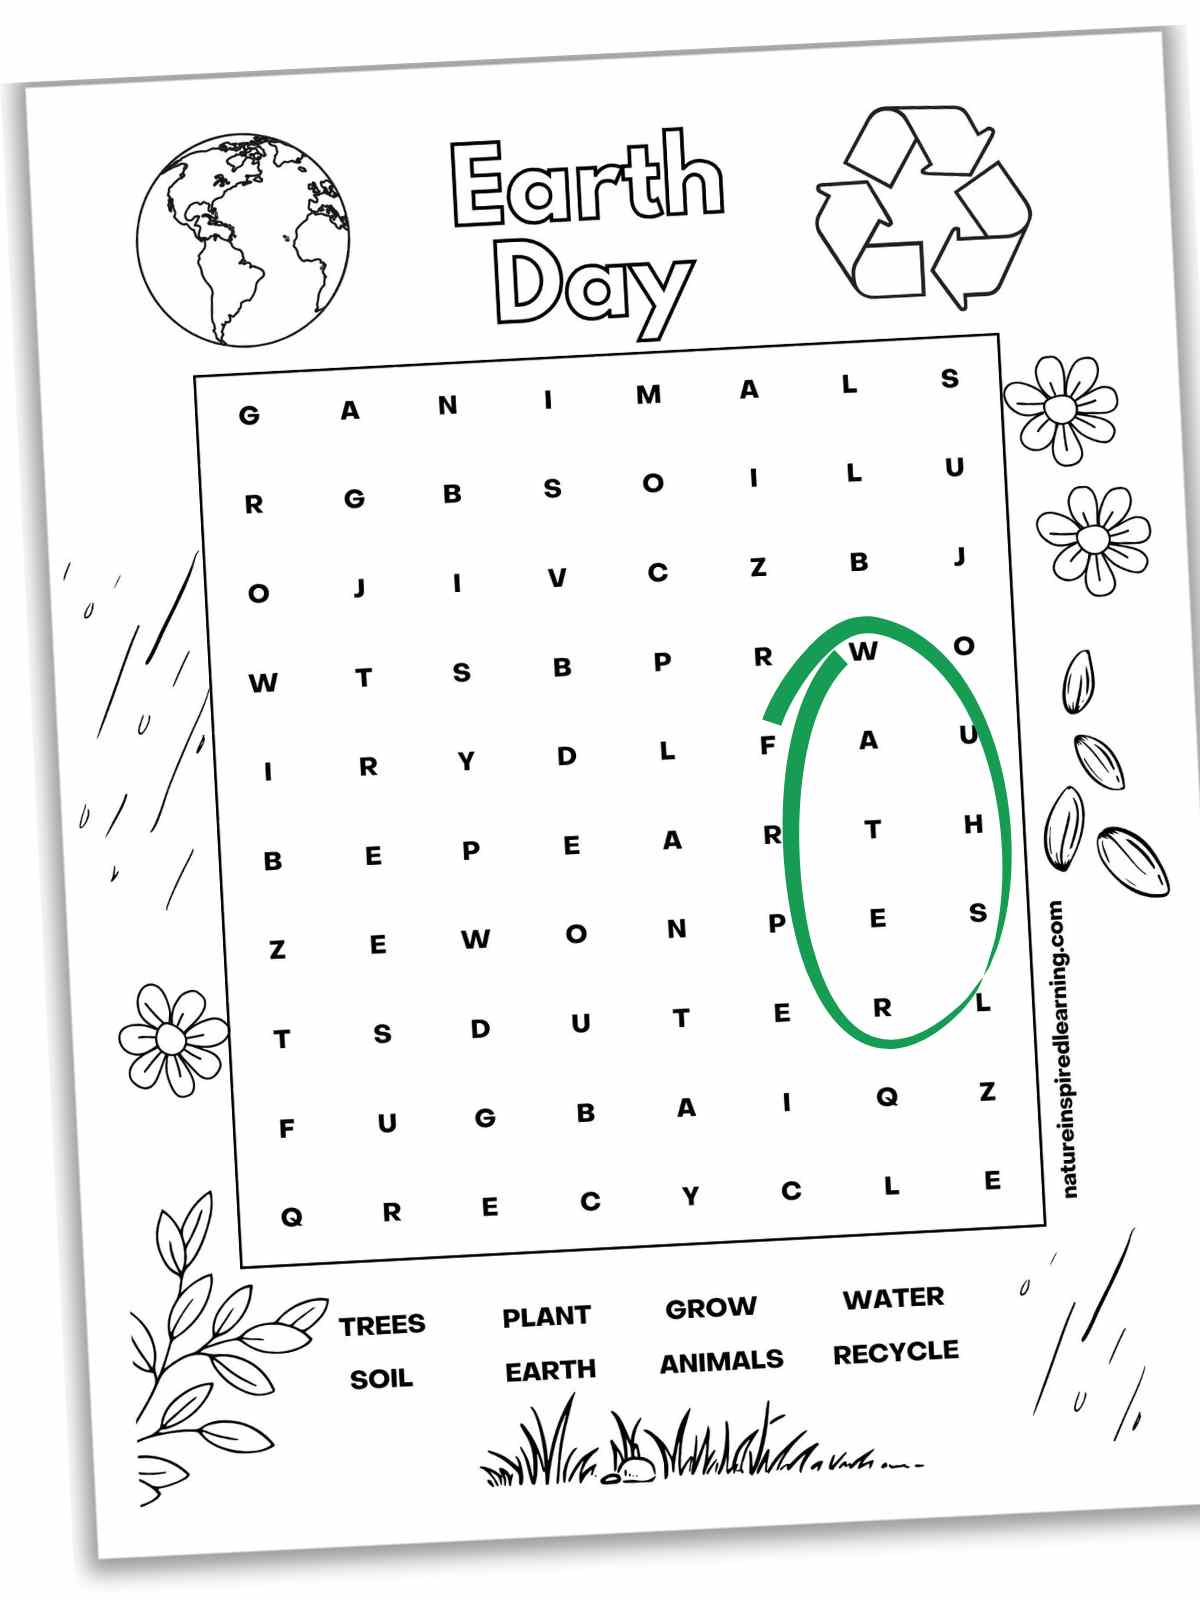 Black and white Earth Day word search with different designs in the border of the puzzle. Water circled in green on the printable.